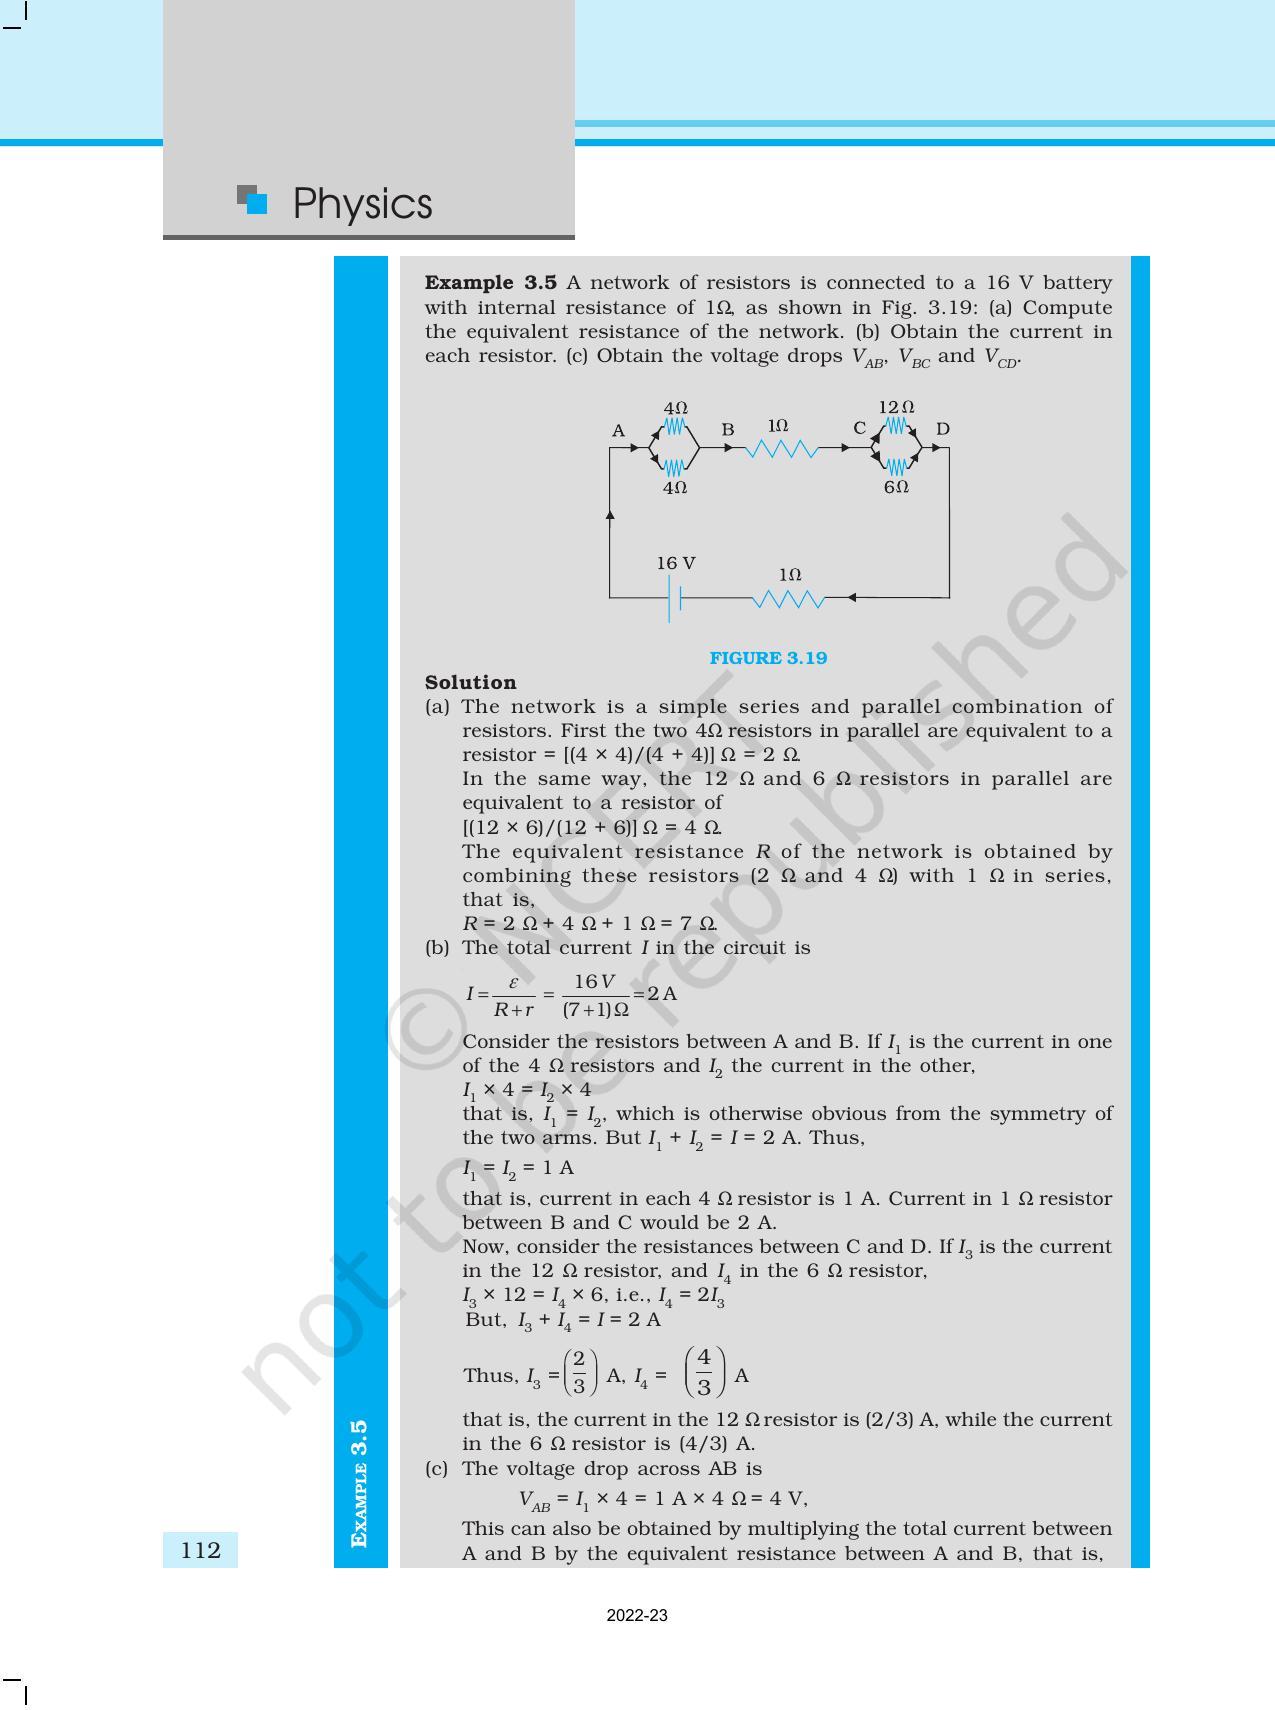 NCERT Book for Class 12 Physics Chapter 3 Current Electricity - Page 20